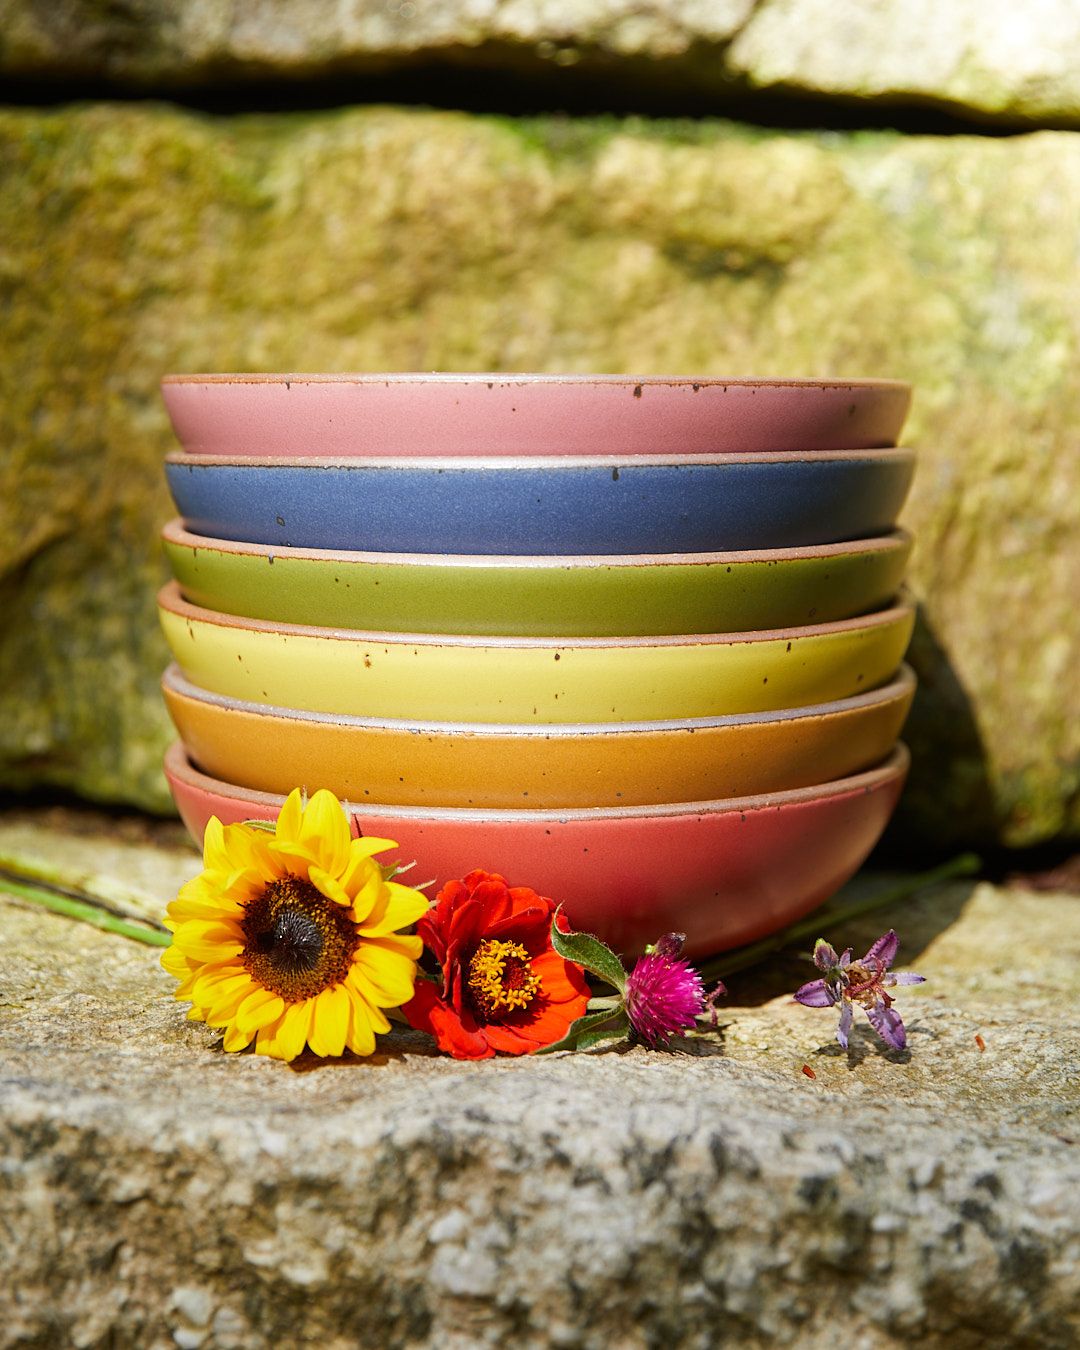 Stack of everyday bowls, from bottom to top - red, orange, yellow, green, blue, pink